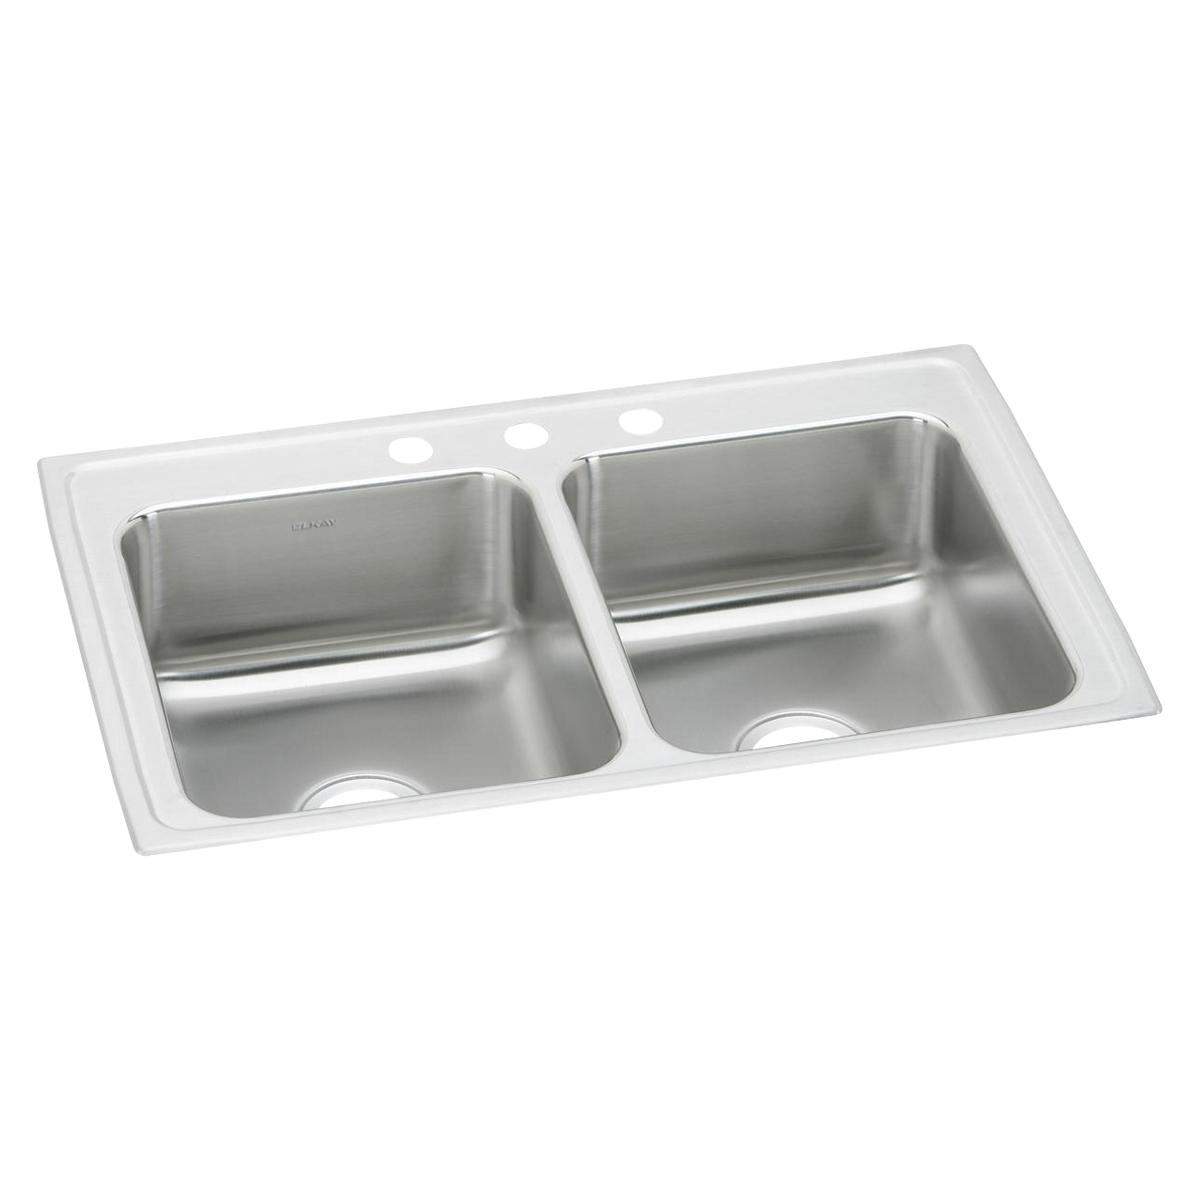 Elkay Lustertone Classic 33" x 21-1/4" x 7-7/8" Equal Double Bowl Drop-in Sink with Quick-clip